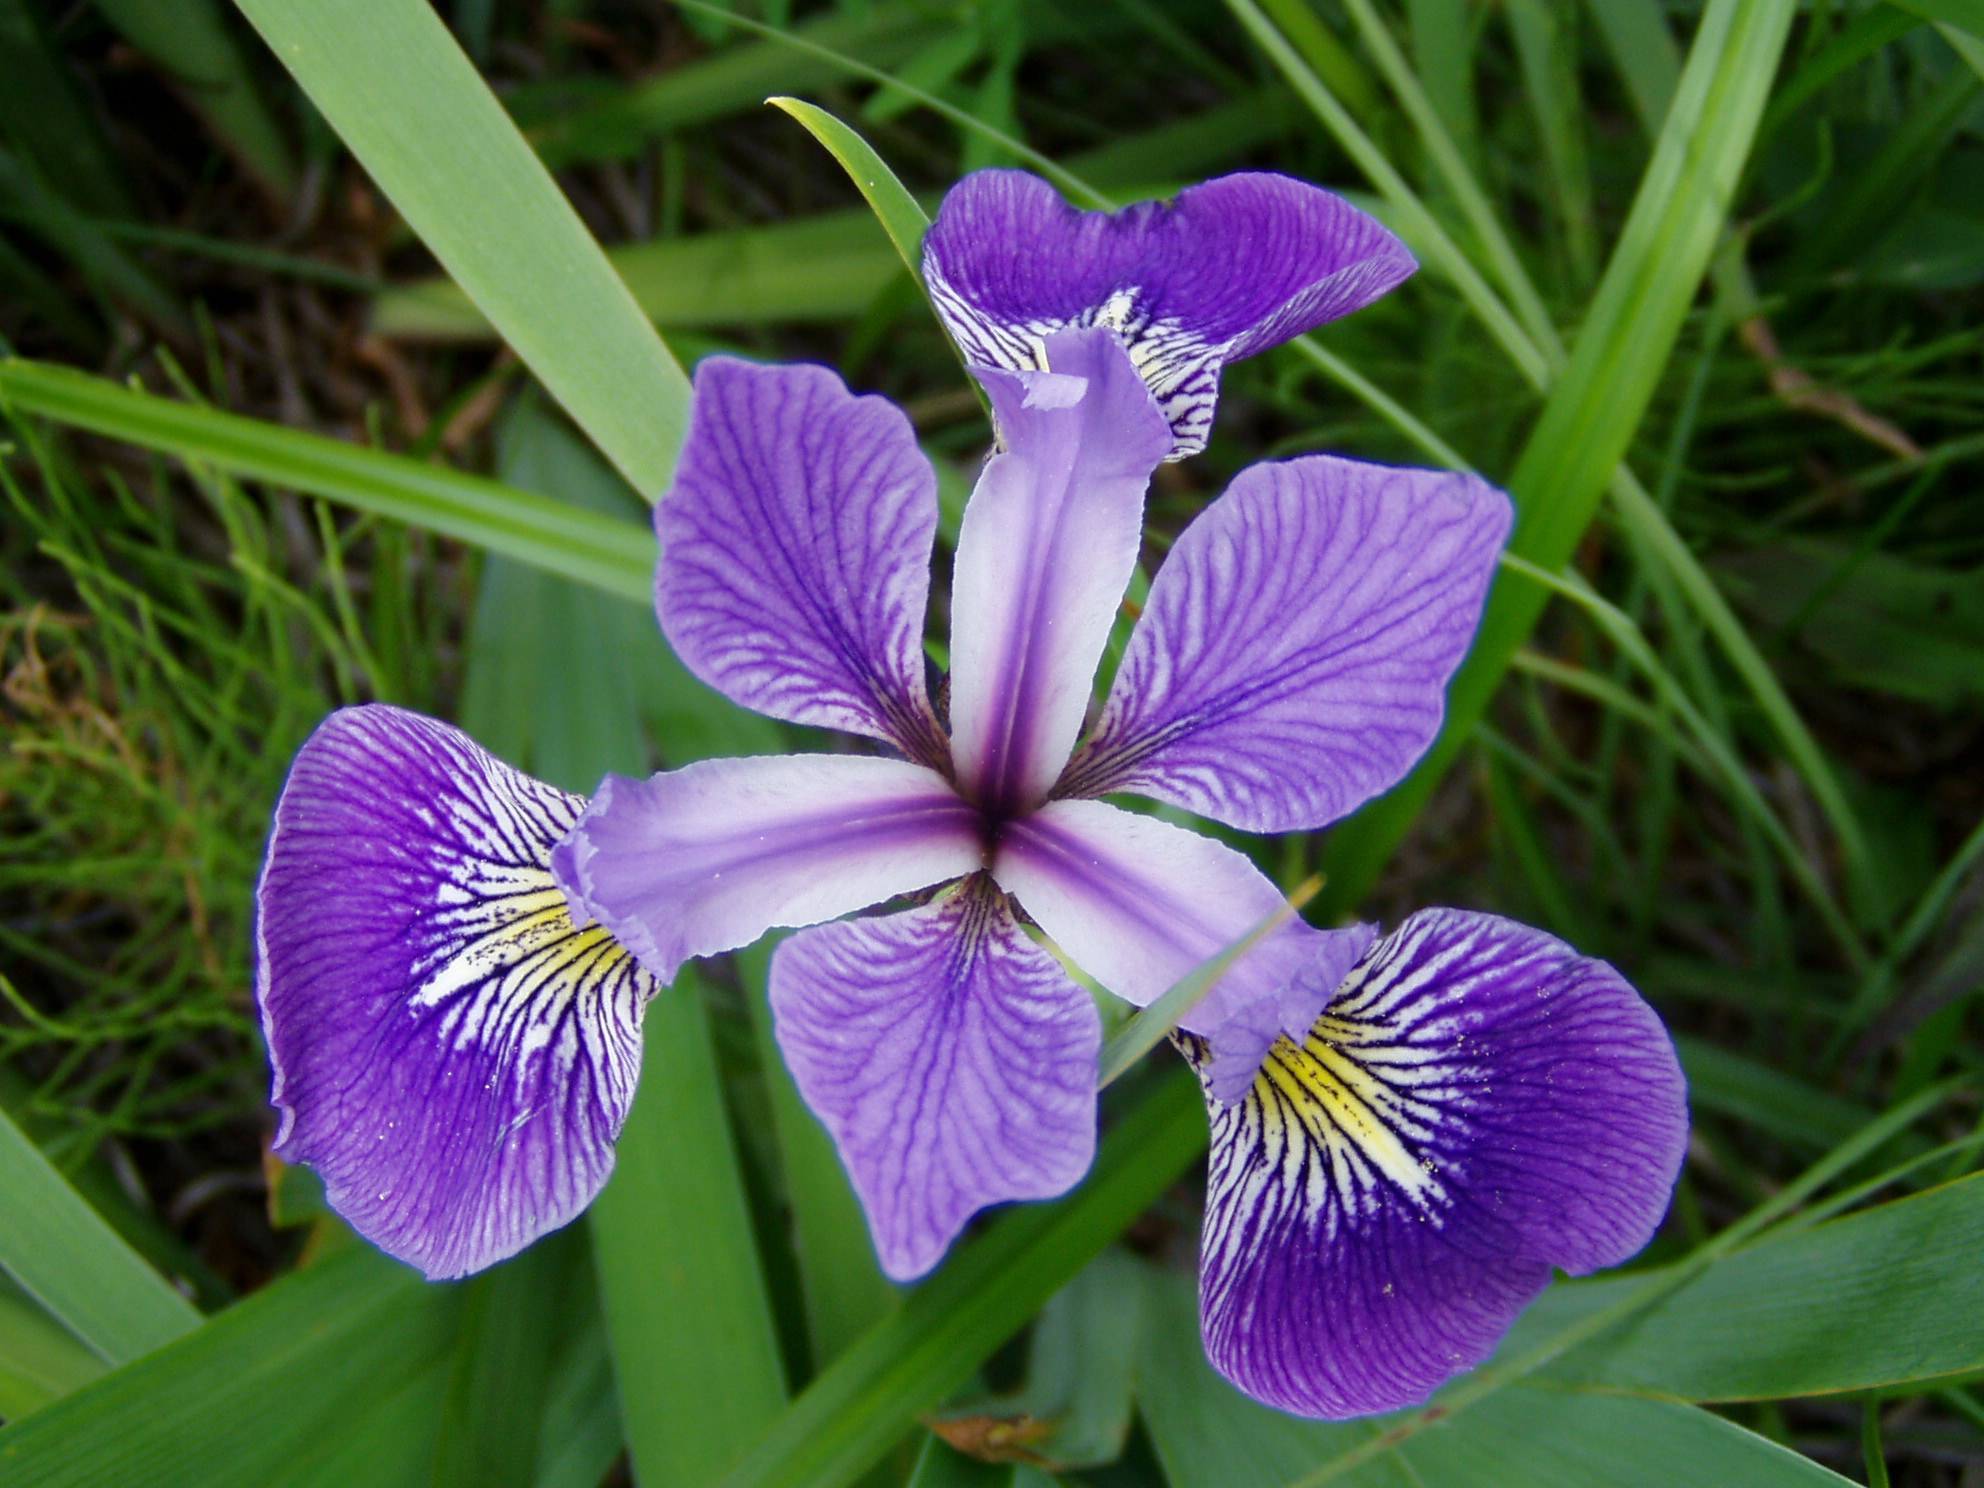 blue-purple flowers with green leaves and stems